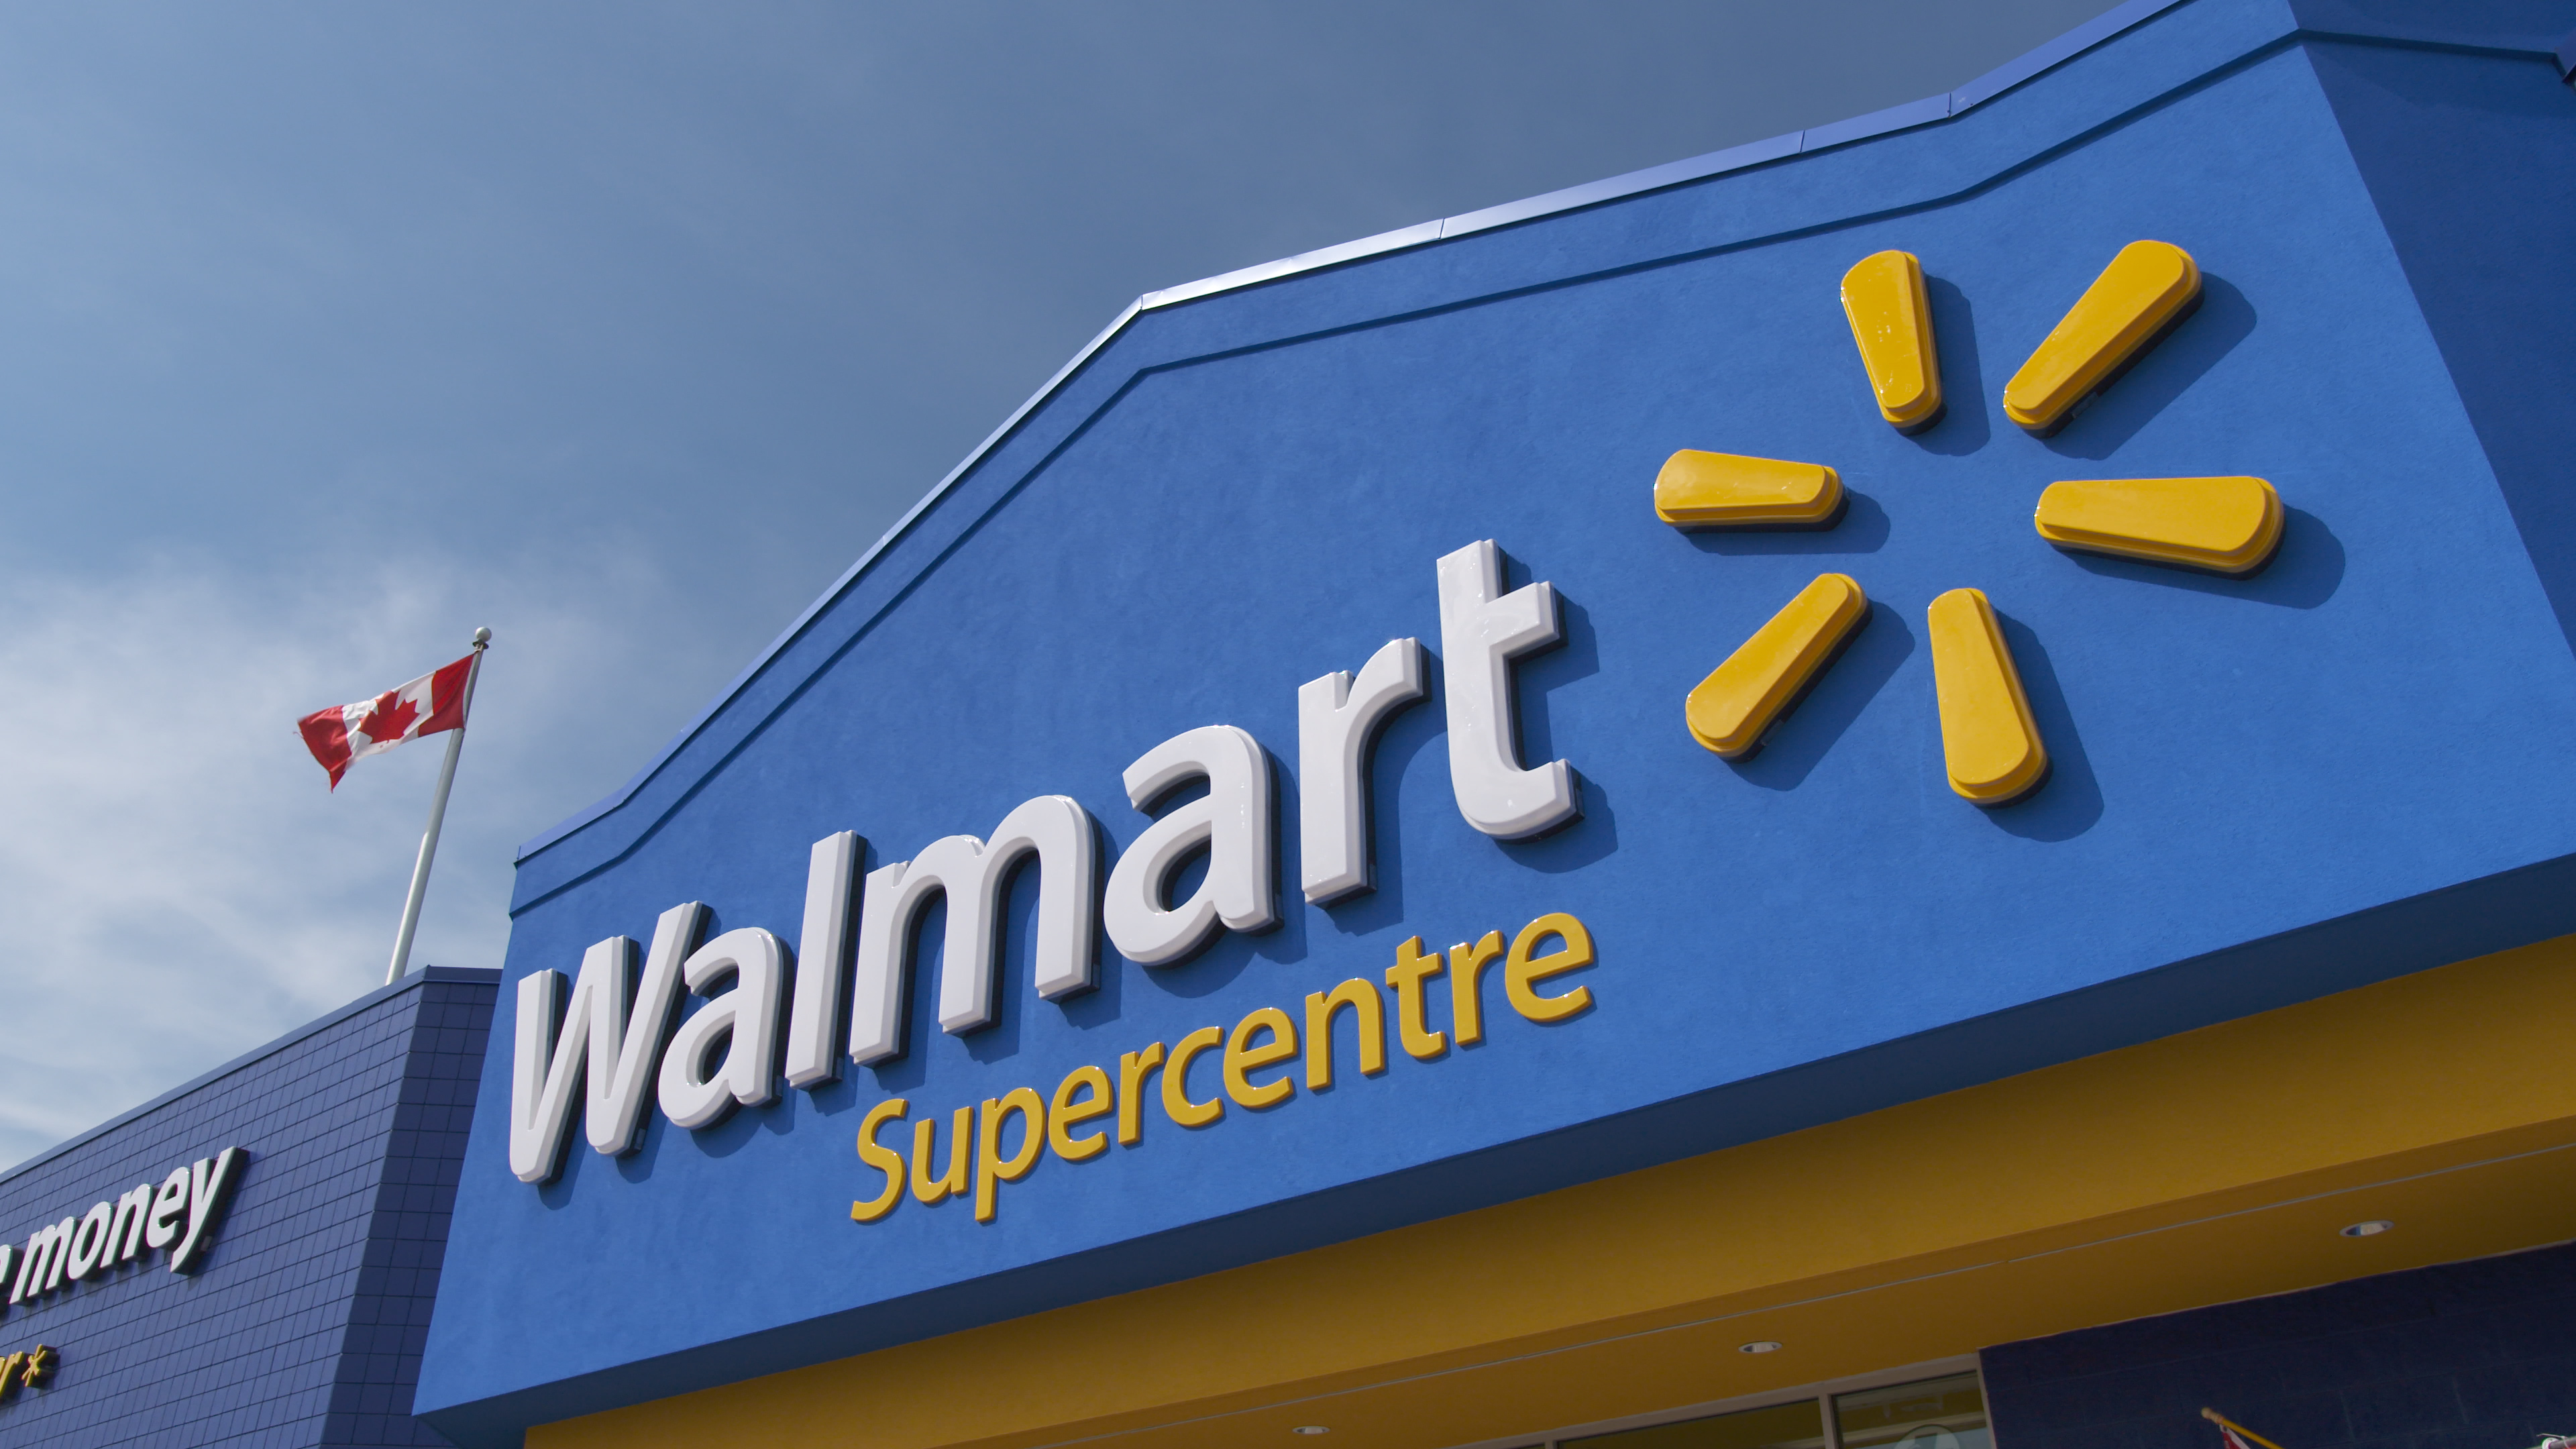 Prince George Walmart now offering home grocery delivery service - Prince  George Citizen